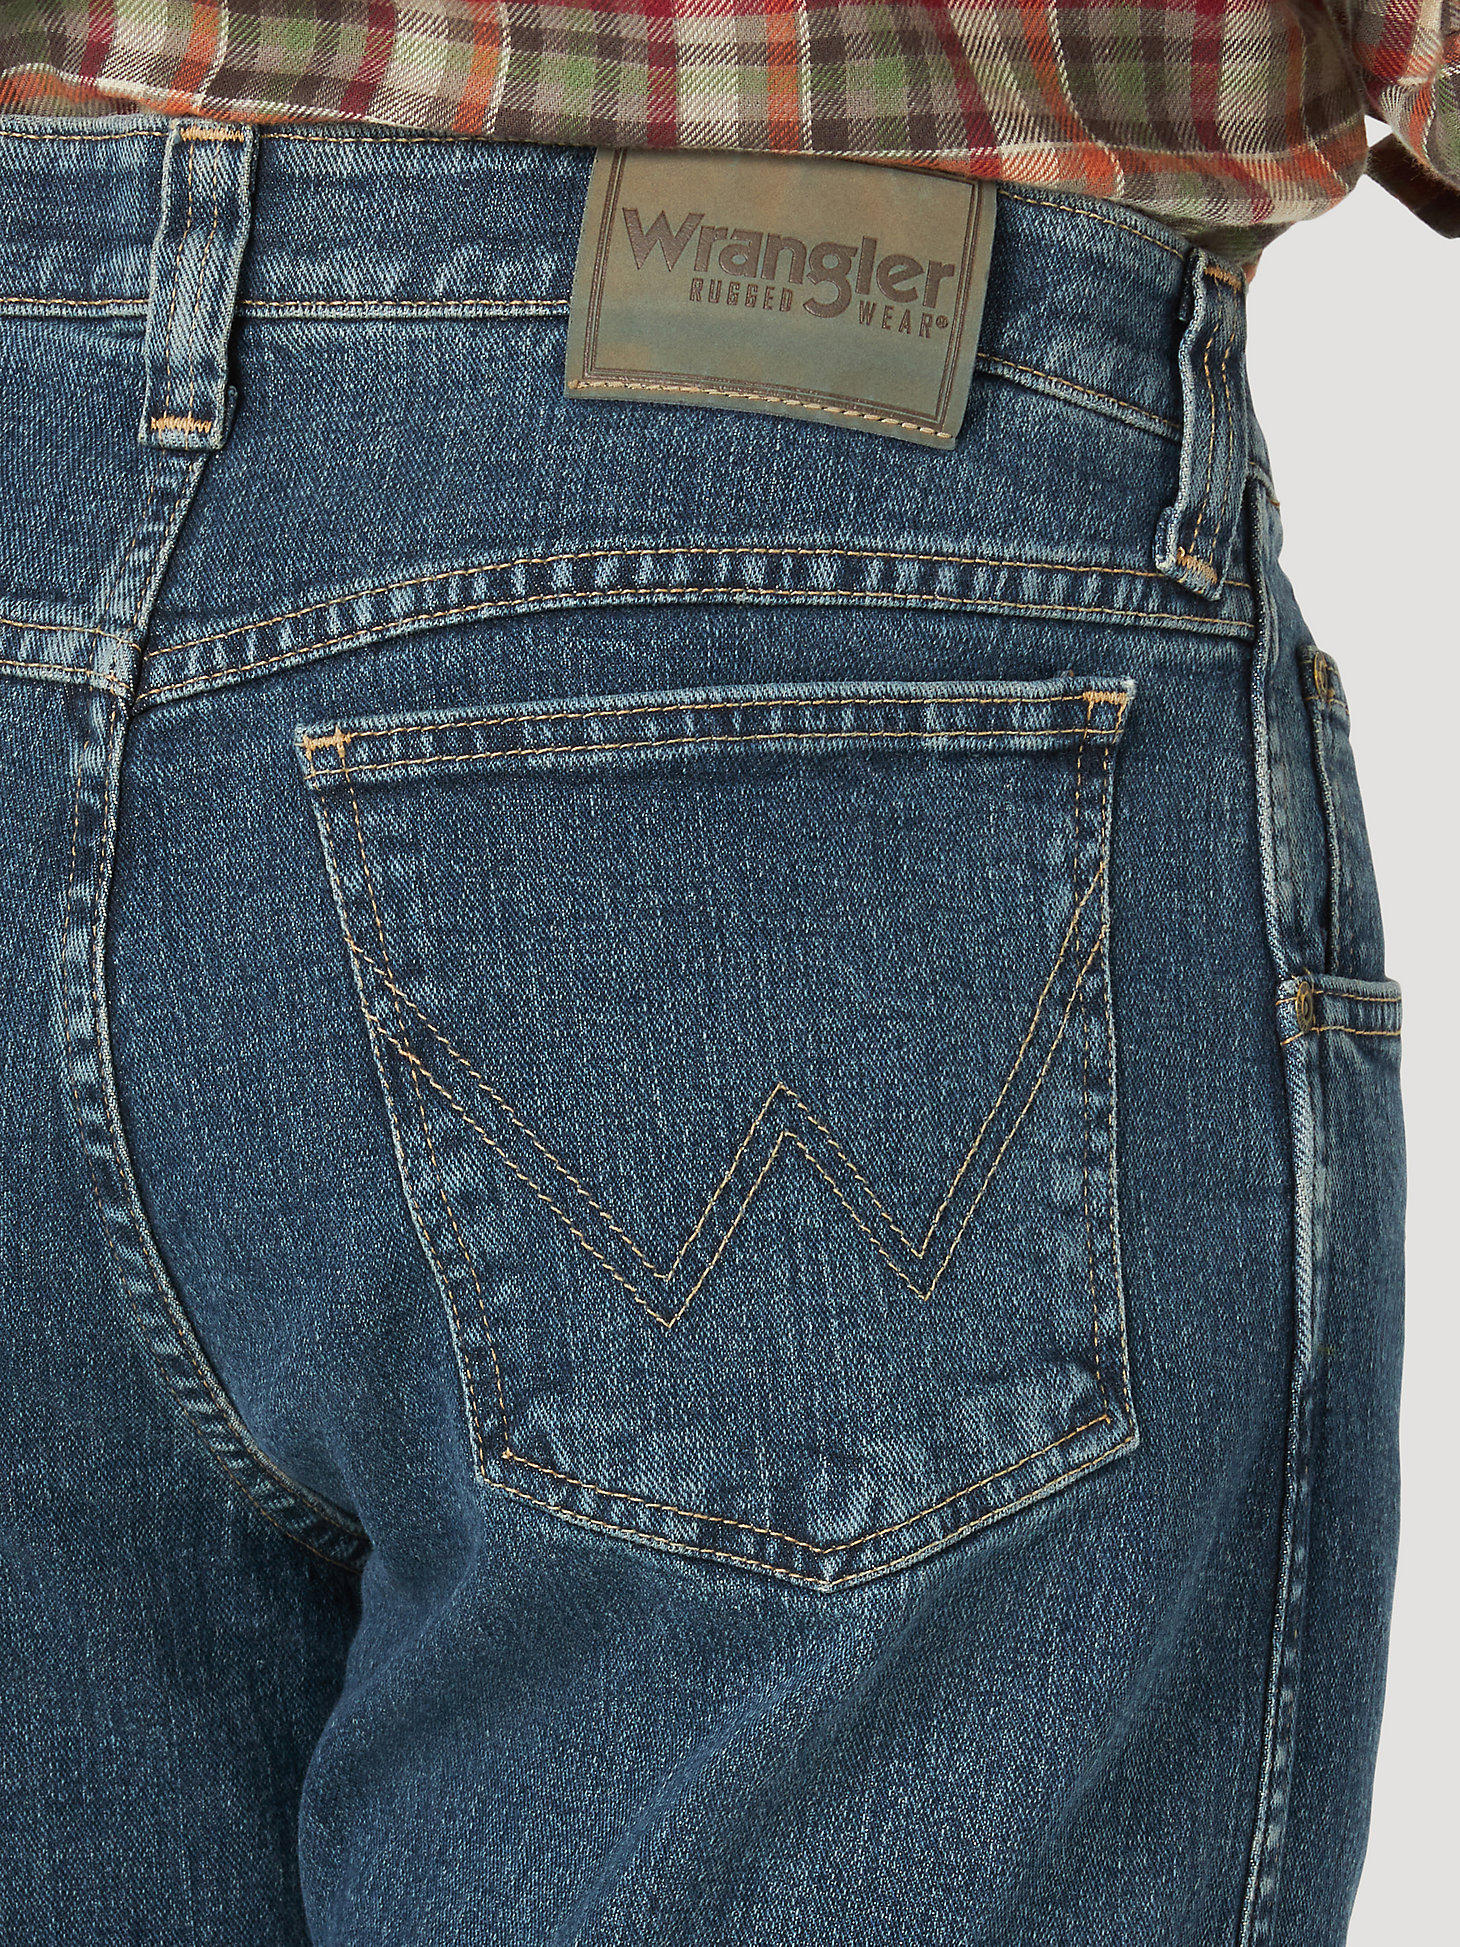 Wrangler Rugged Wear® Performance Series Relaxed Fit Jean in Mid Stone alternative view 3